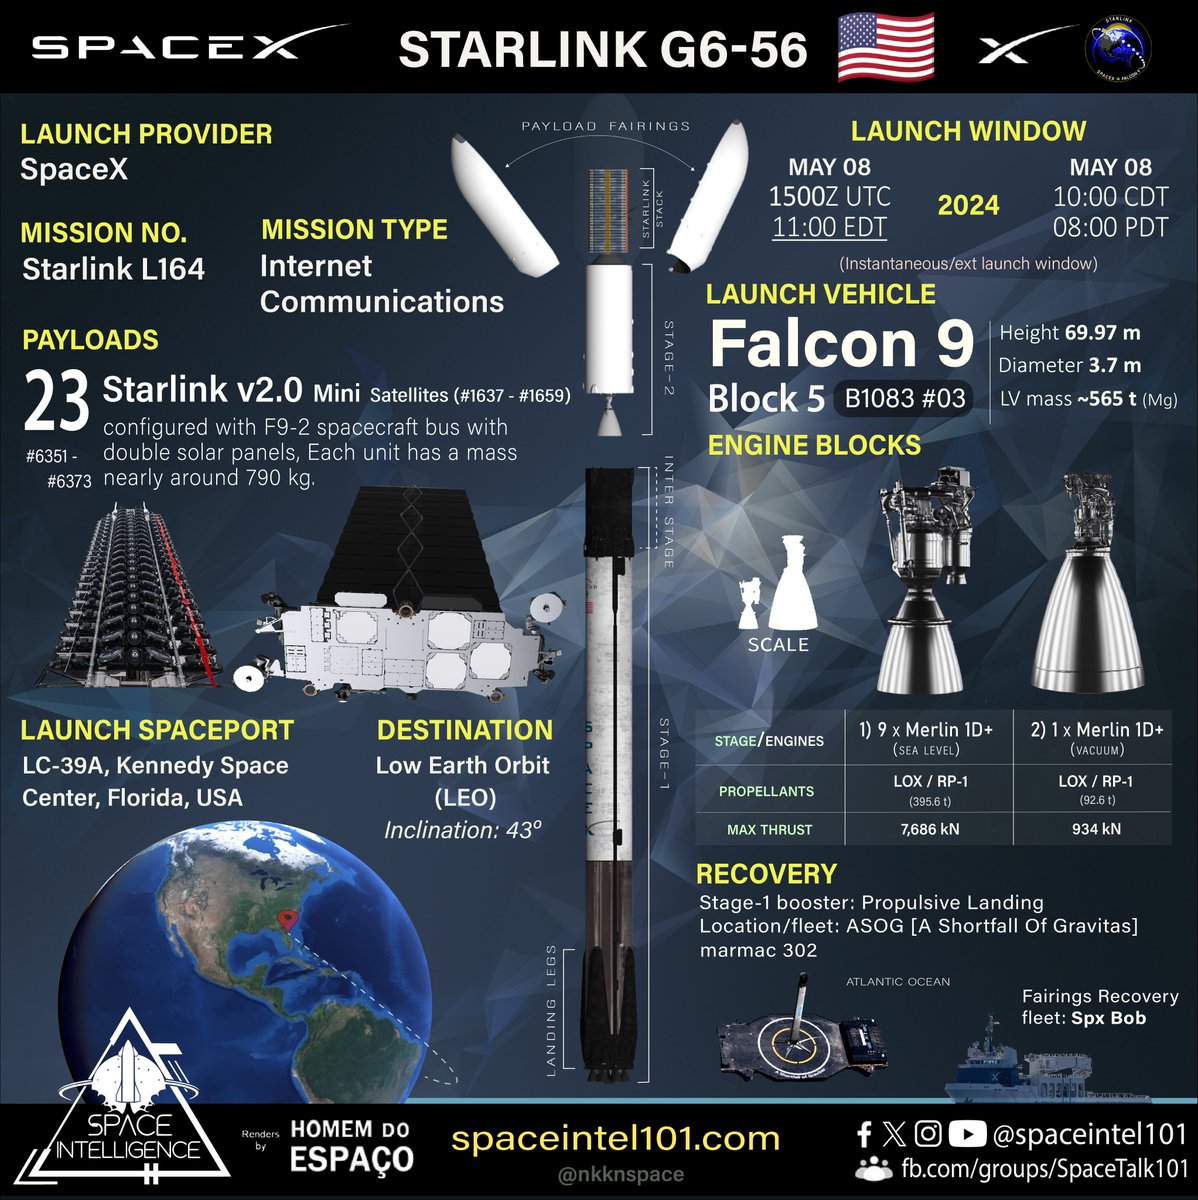 Orbital launch no. 87 of 2024 🇺🇲🚀⭐🔗🛰️➕

Starlink L164 | SpaceX | May 08 | 1500 UTC

@SpaceX's 32nd #Starlink mission of 2024 to launch 23 v2.0 @Starlink Mini🛰️ on its #Falcon9 #B1083.3🚀 to 43° Low Earth Orbit from @NASAKennedy LC-39A, Cape Canaveral.
#SpaceX #capecanaveral…